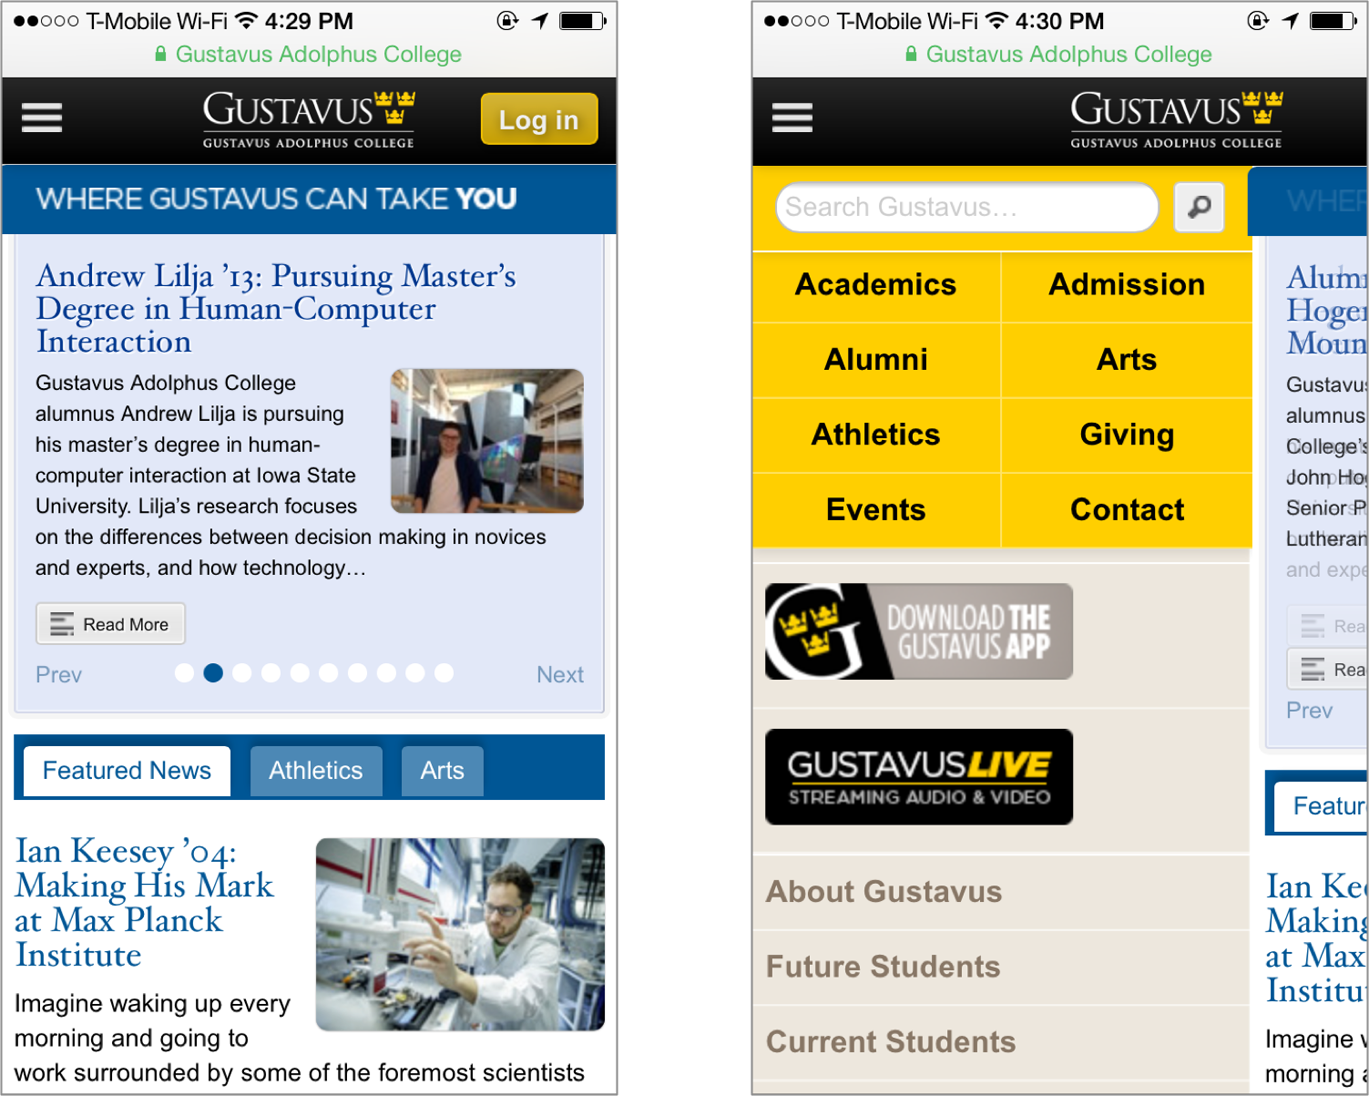 The Gustavus Adolphus site employs responsive web design techniques so that it can be viewed properly in smartphone browsers—the “hamburger” menu icon provides access to the site’s navigation and search systems